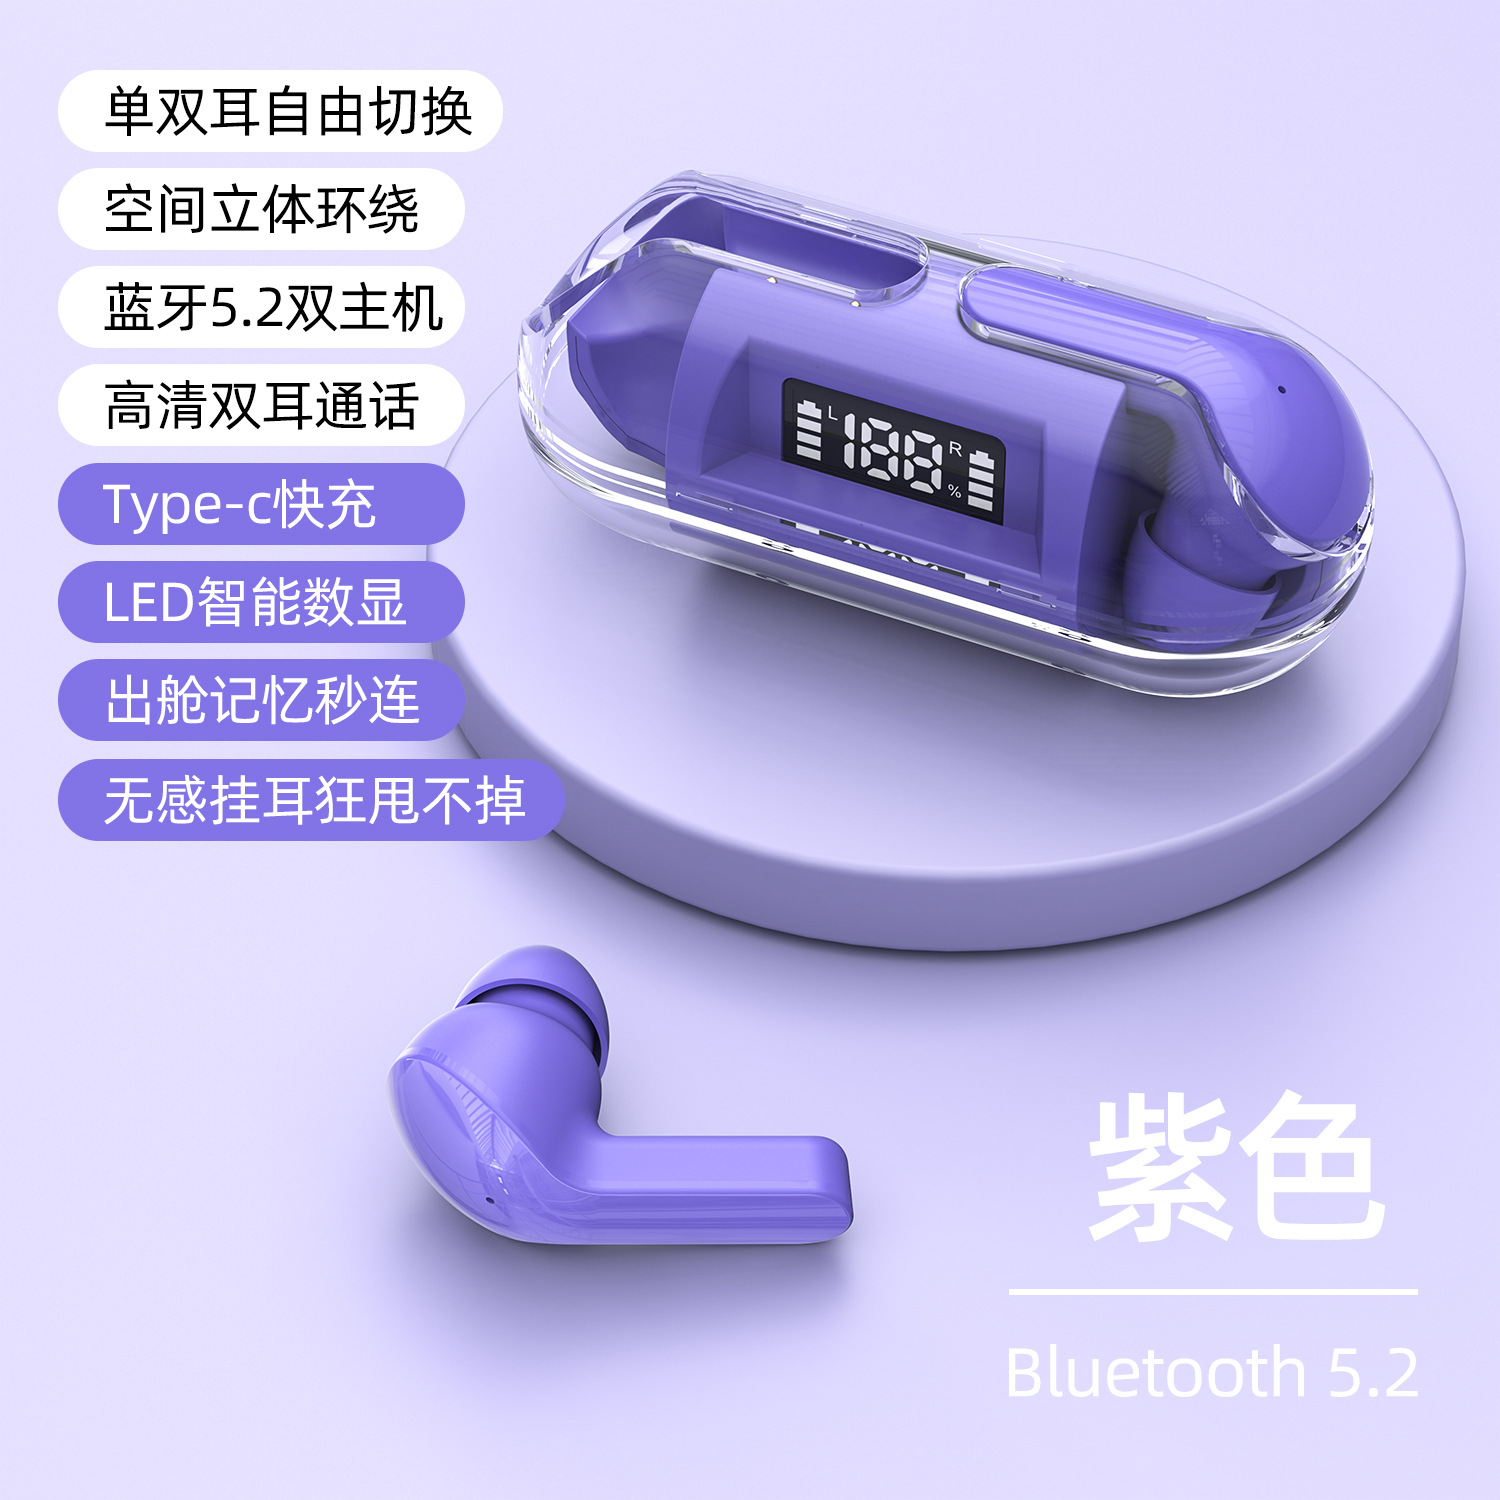 Cross-Border New Arrival F20 Wireless Bluetooth 5.2 Translucent Design Intelligent Digital Display with Touch in-Ear Game Headset